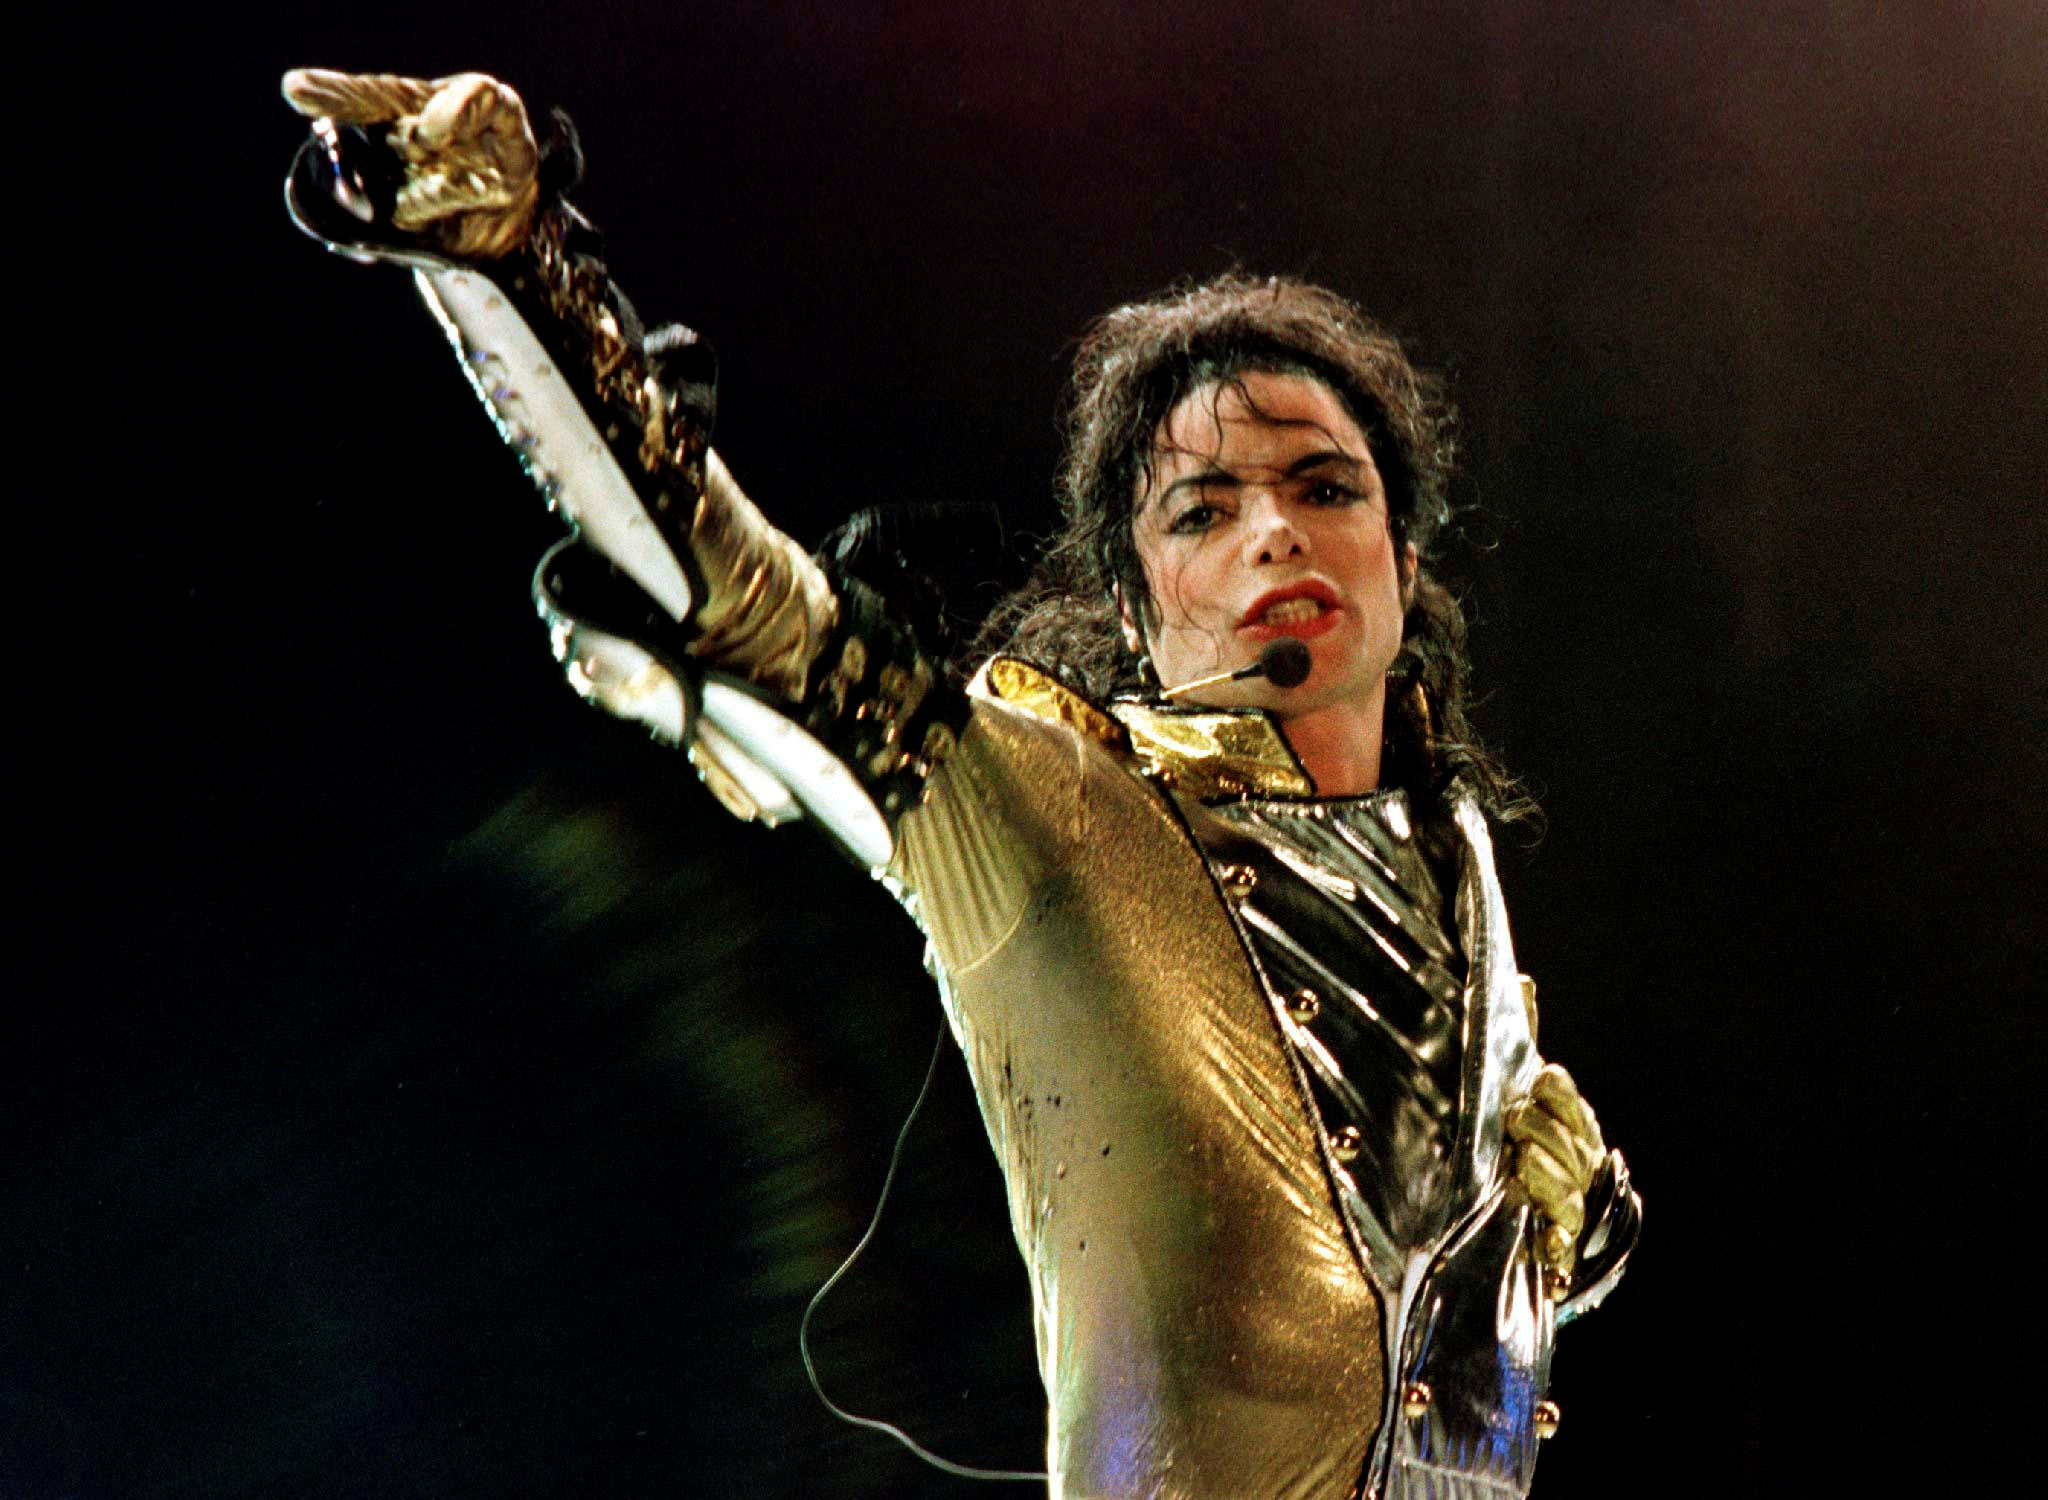 File photo of U.S. pop star Michael Jackson performing during his concert in Vienna